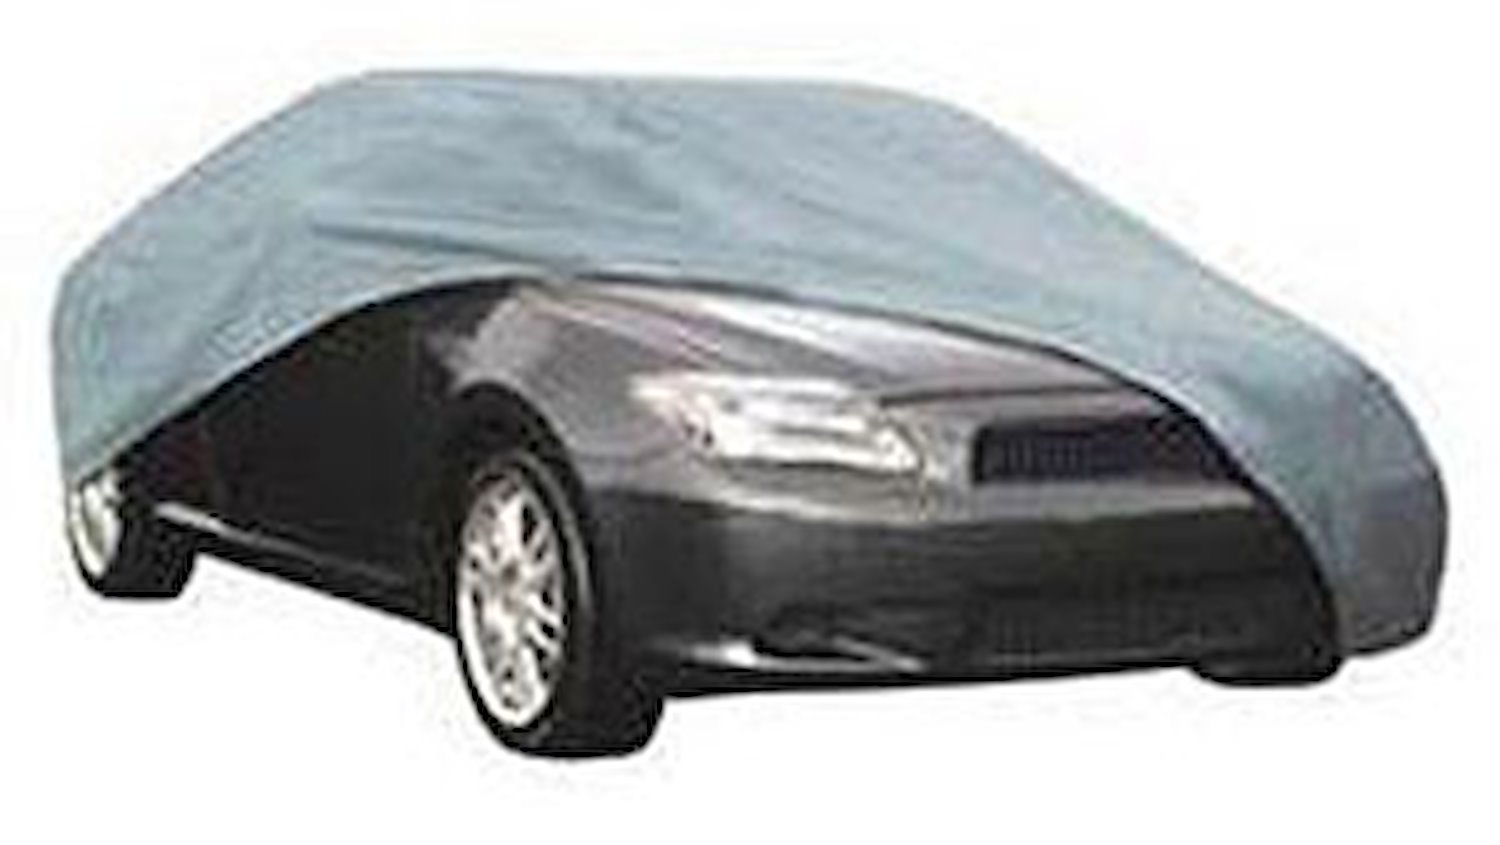 Budge Lite Car Cover Fits Cars Up To 22" in Length